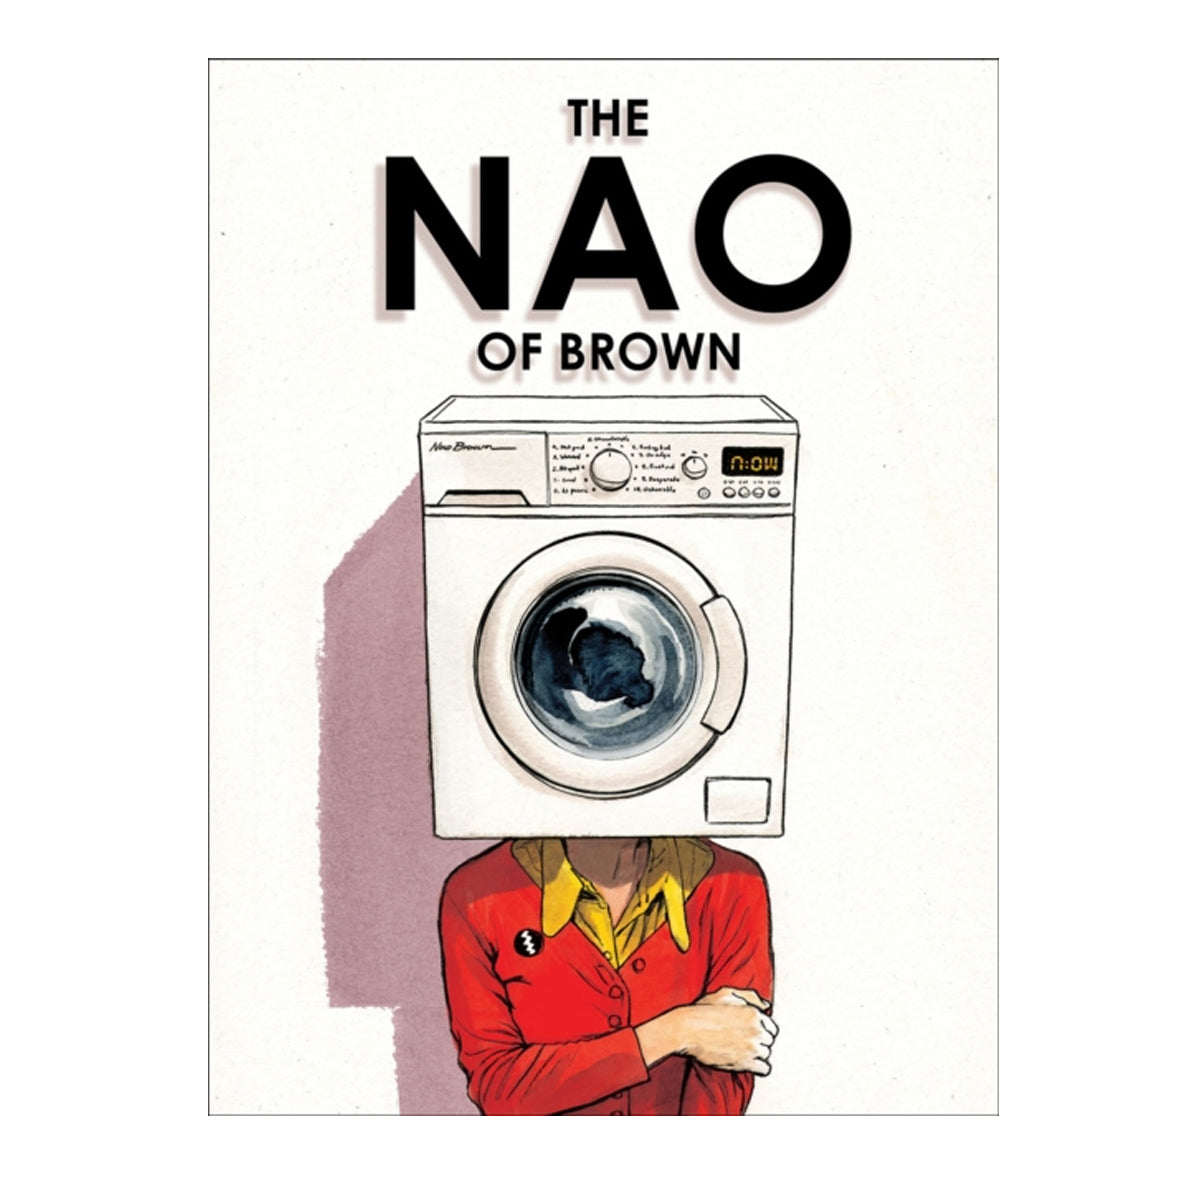 Book - The Nao of Brown